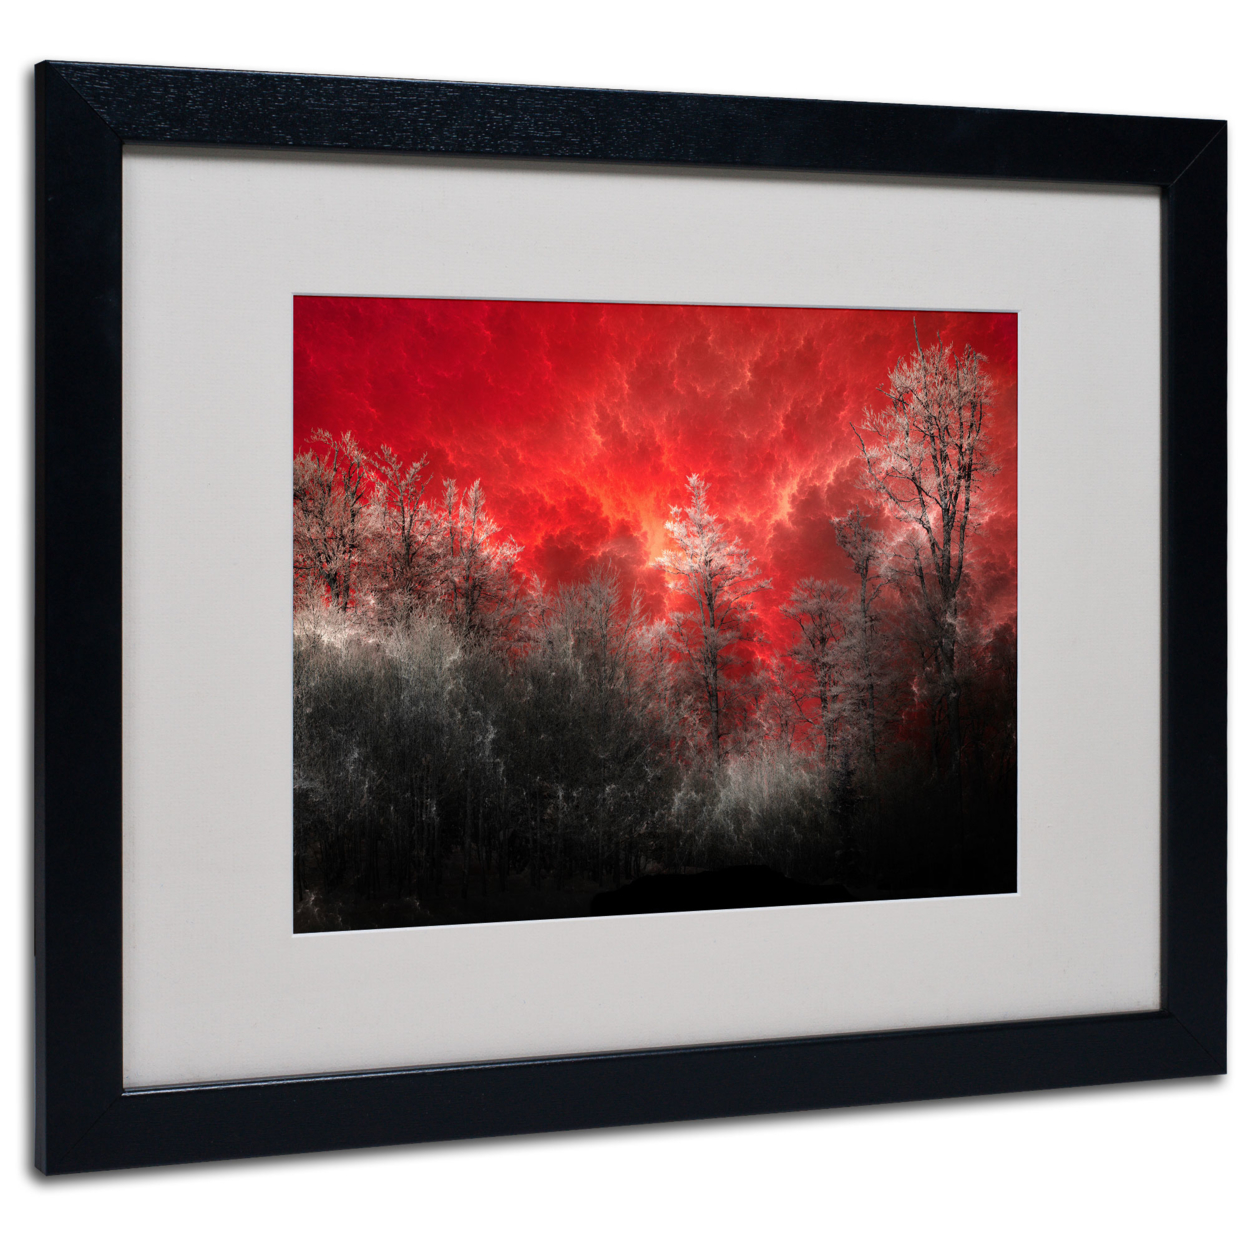 Philippe Sainte-Laudy 'Hot And Cold' Black Wooden Framed Art 18 X 22 Inches